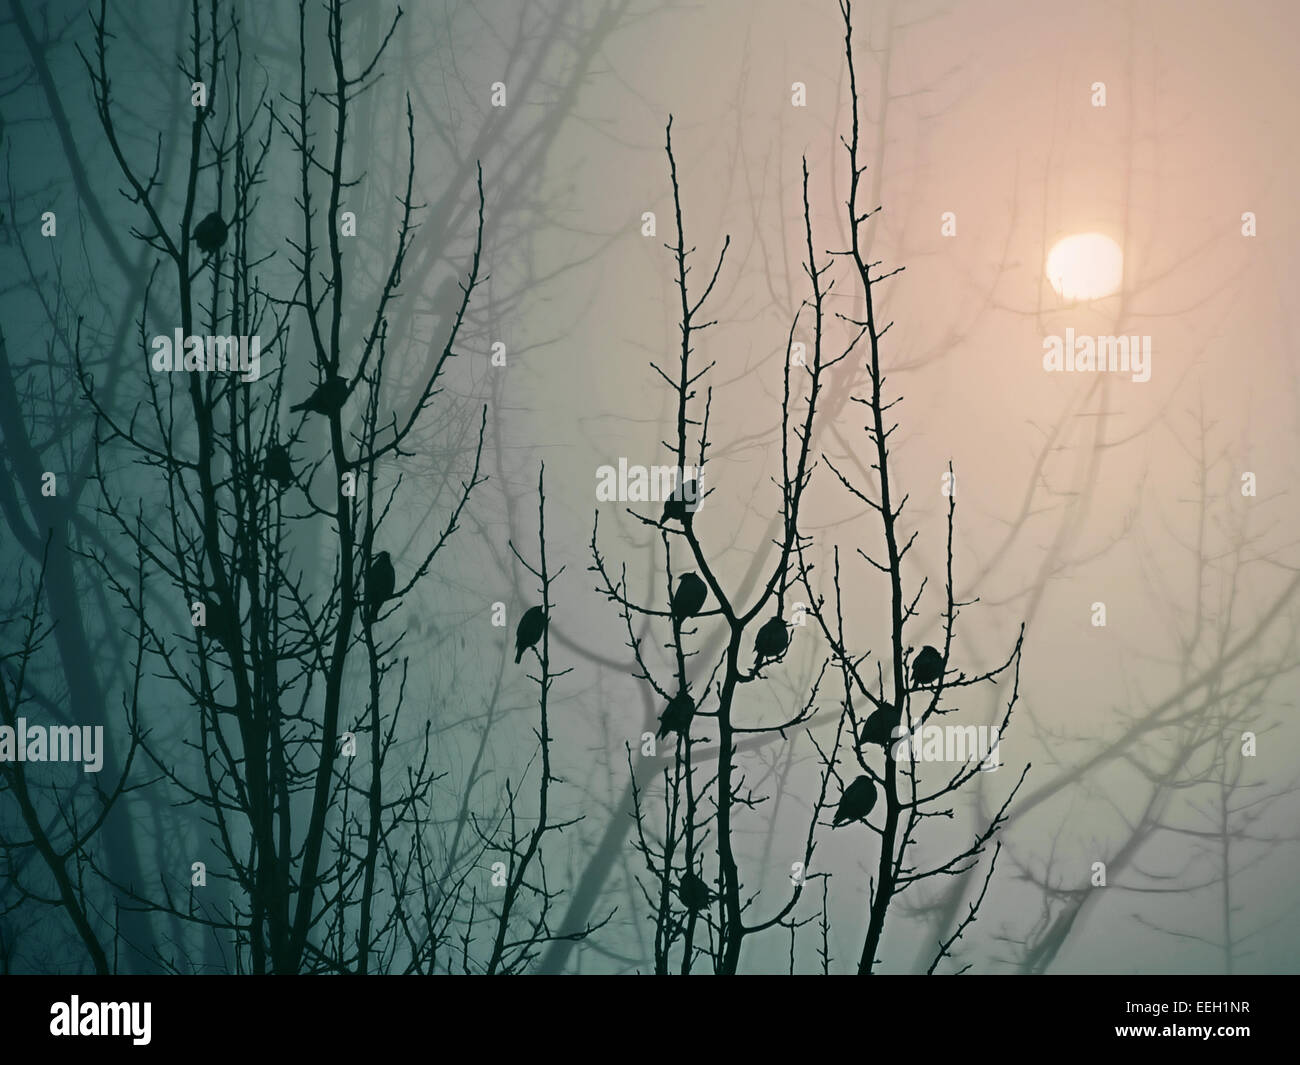 Misty morning in the forest. Flock of birds preparing for a flight to warmer climes. Stock Photo